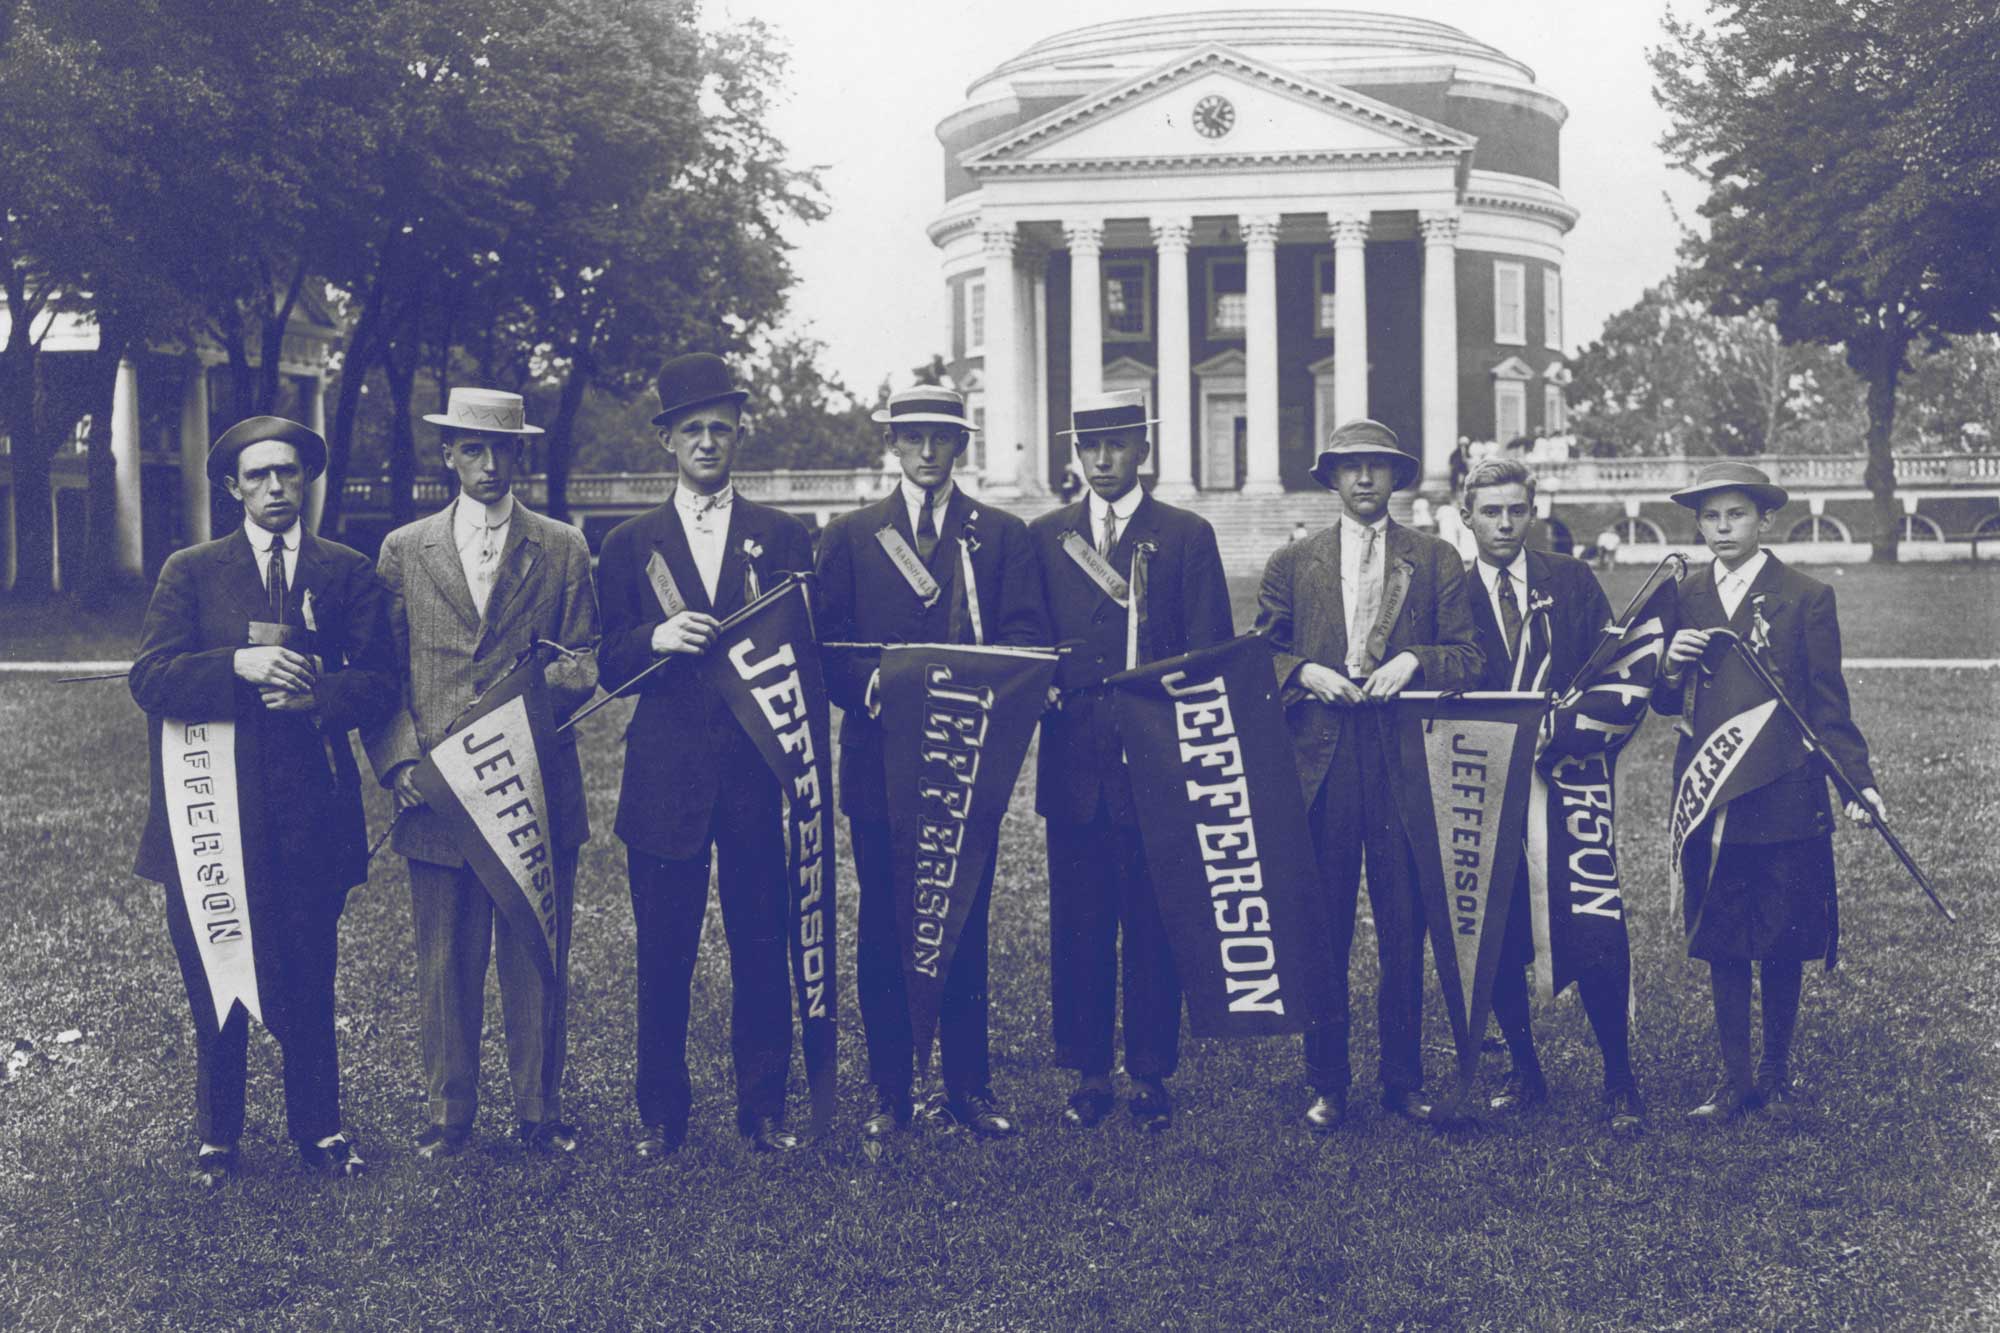 Jefferson Society members on the Lawn, circa 1910. 